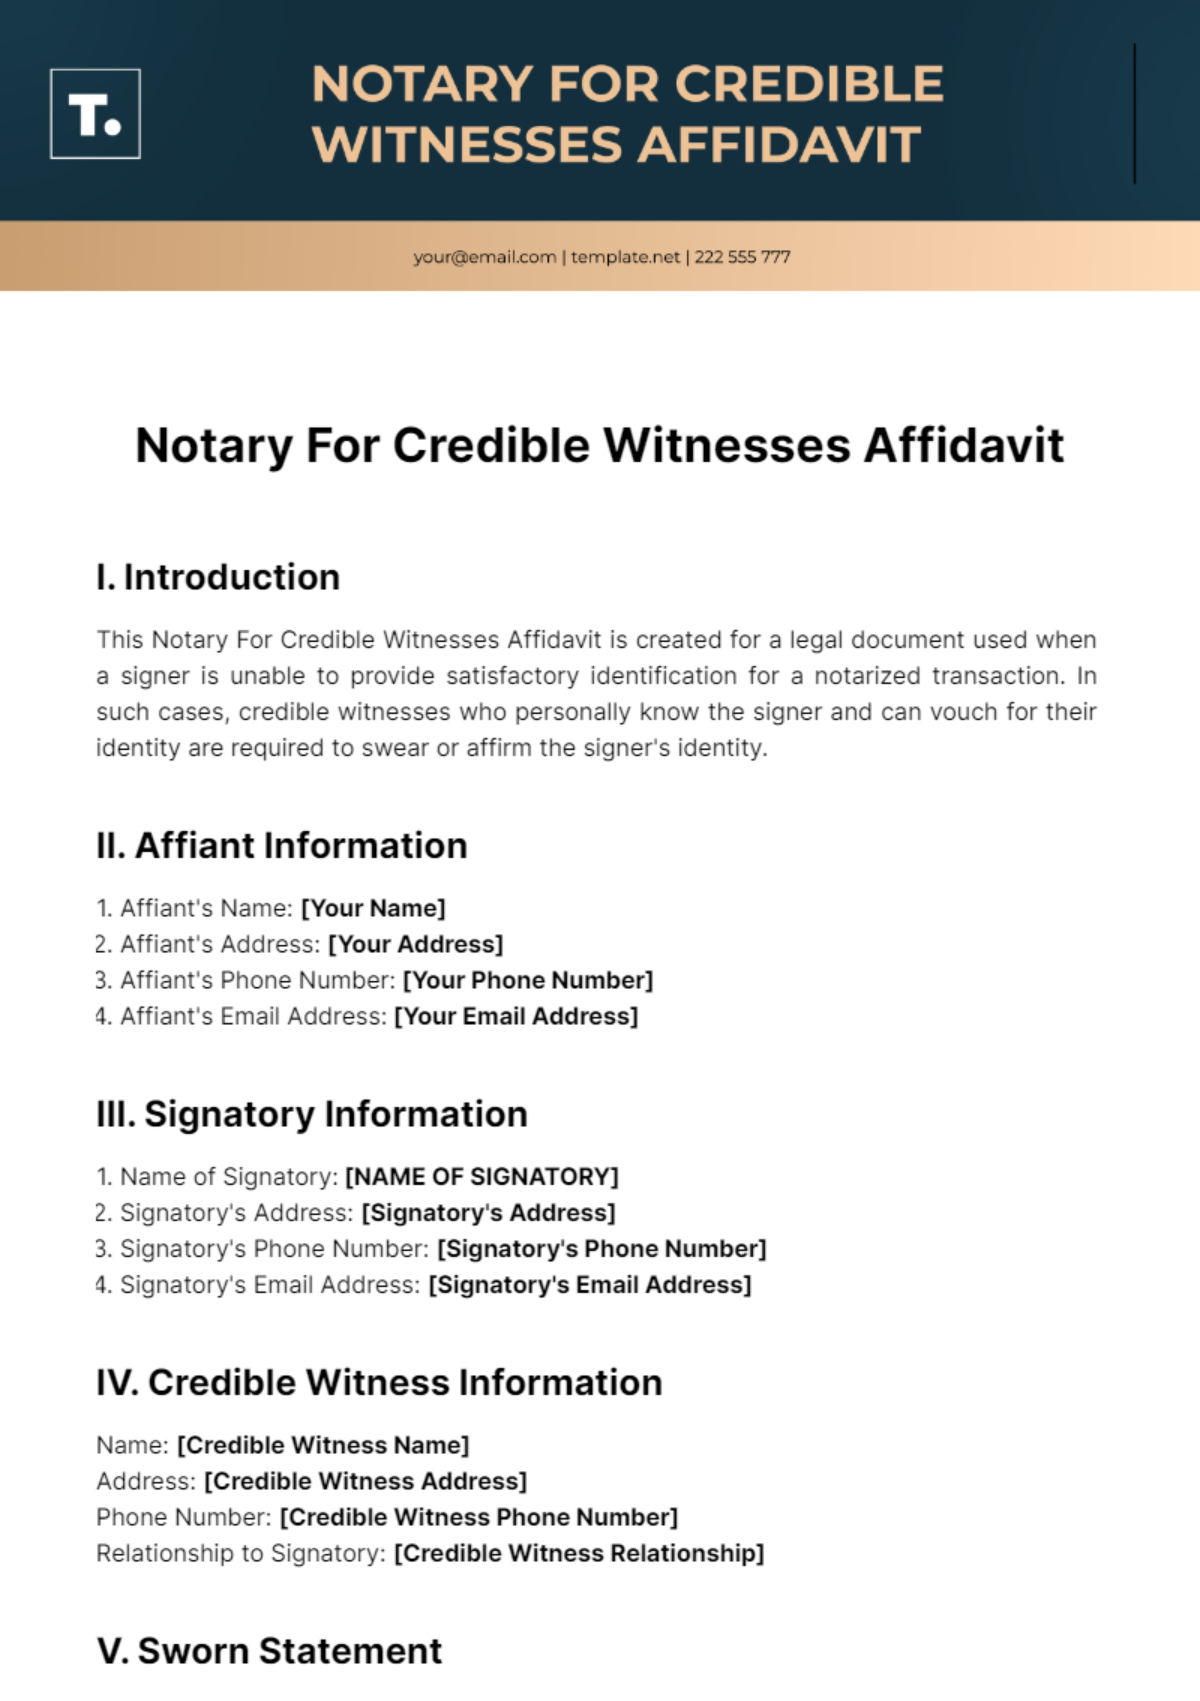 Notary For Credible Witnesses Affidavit Template